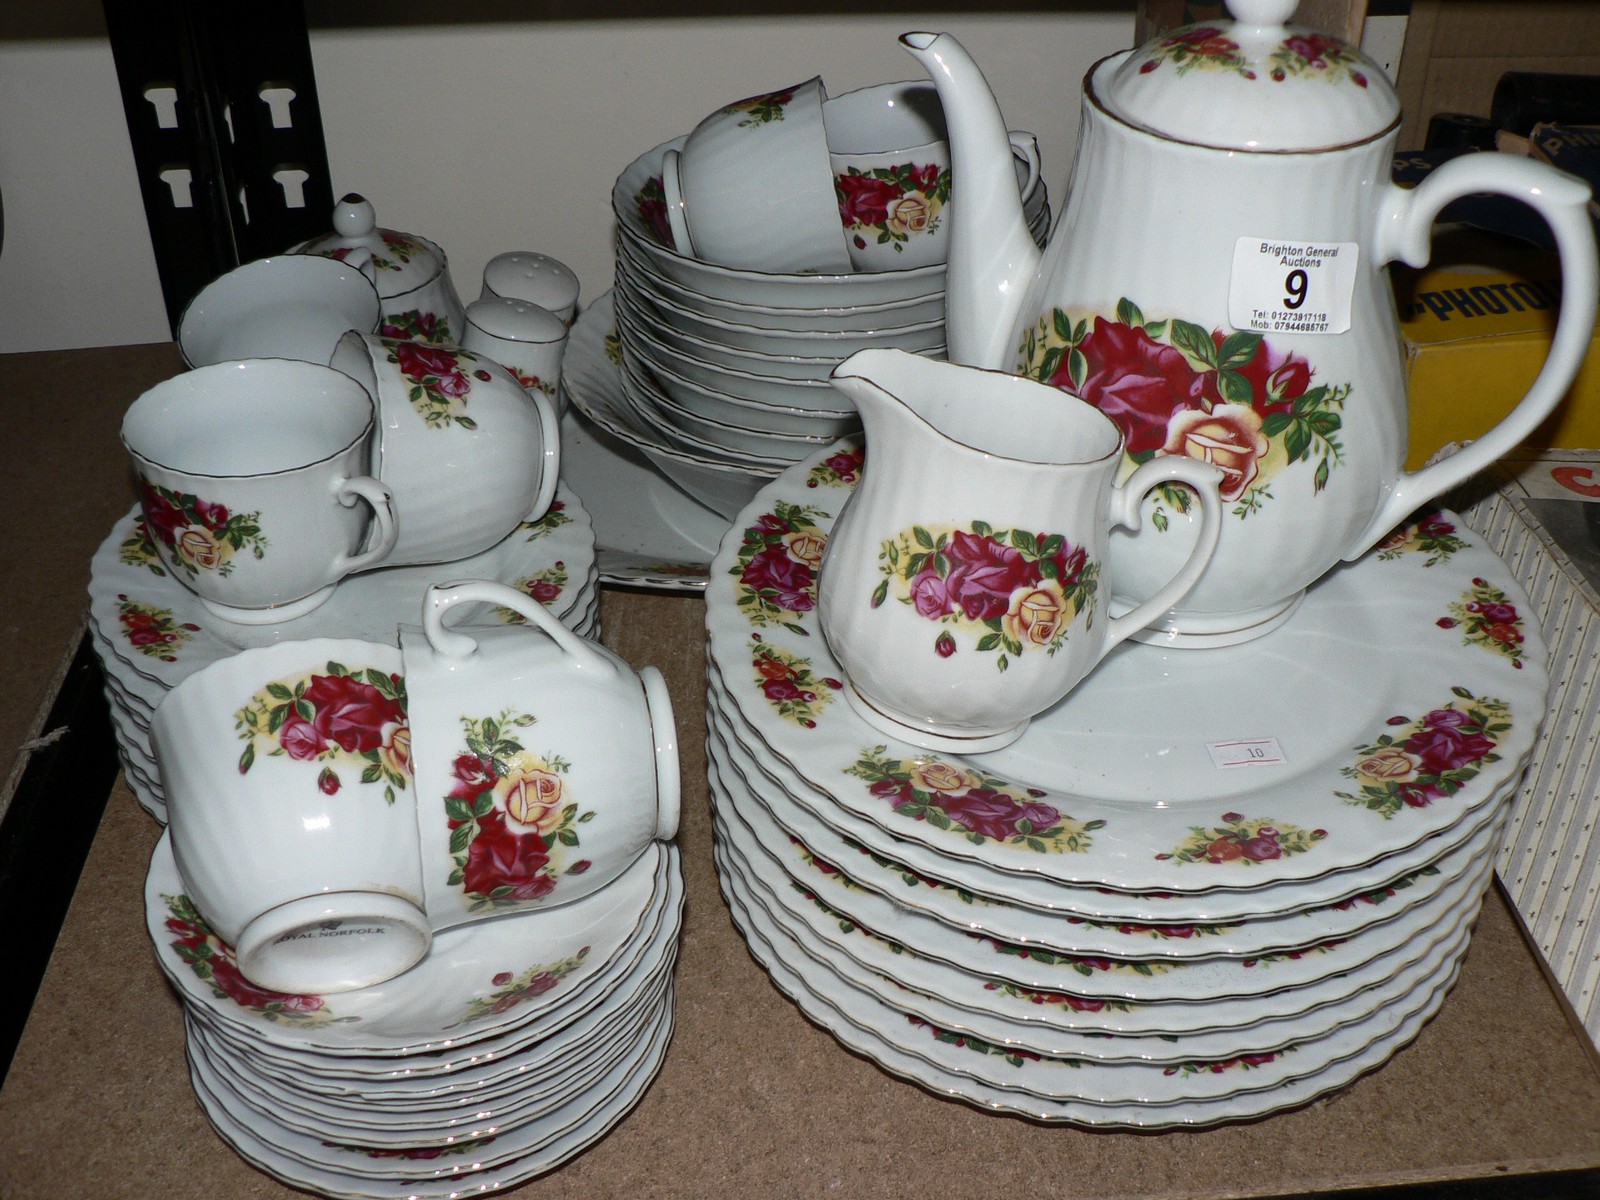 LARGE QUANTITY OF NORFOLK CHINA - DINNER SERVICE ++